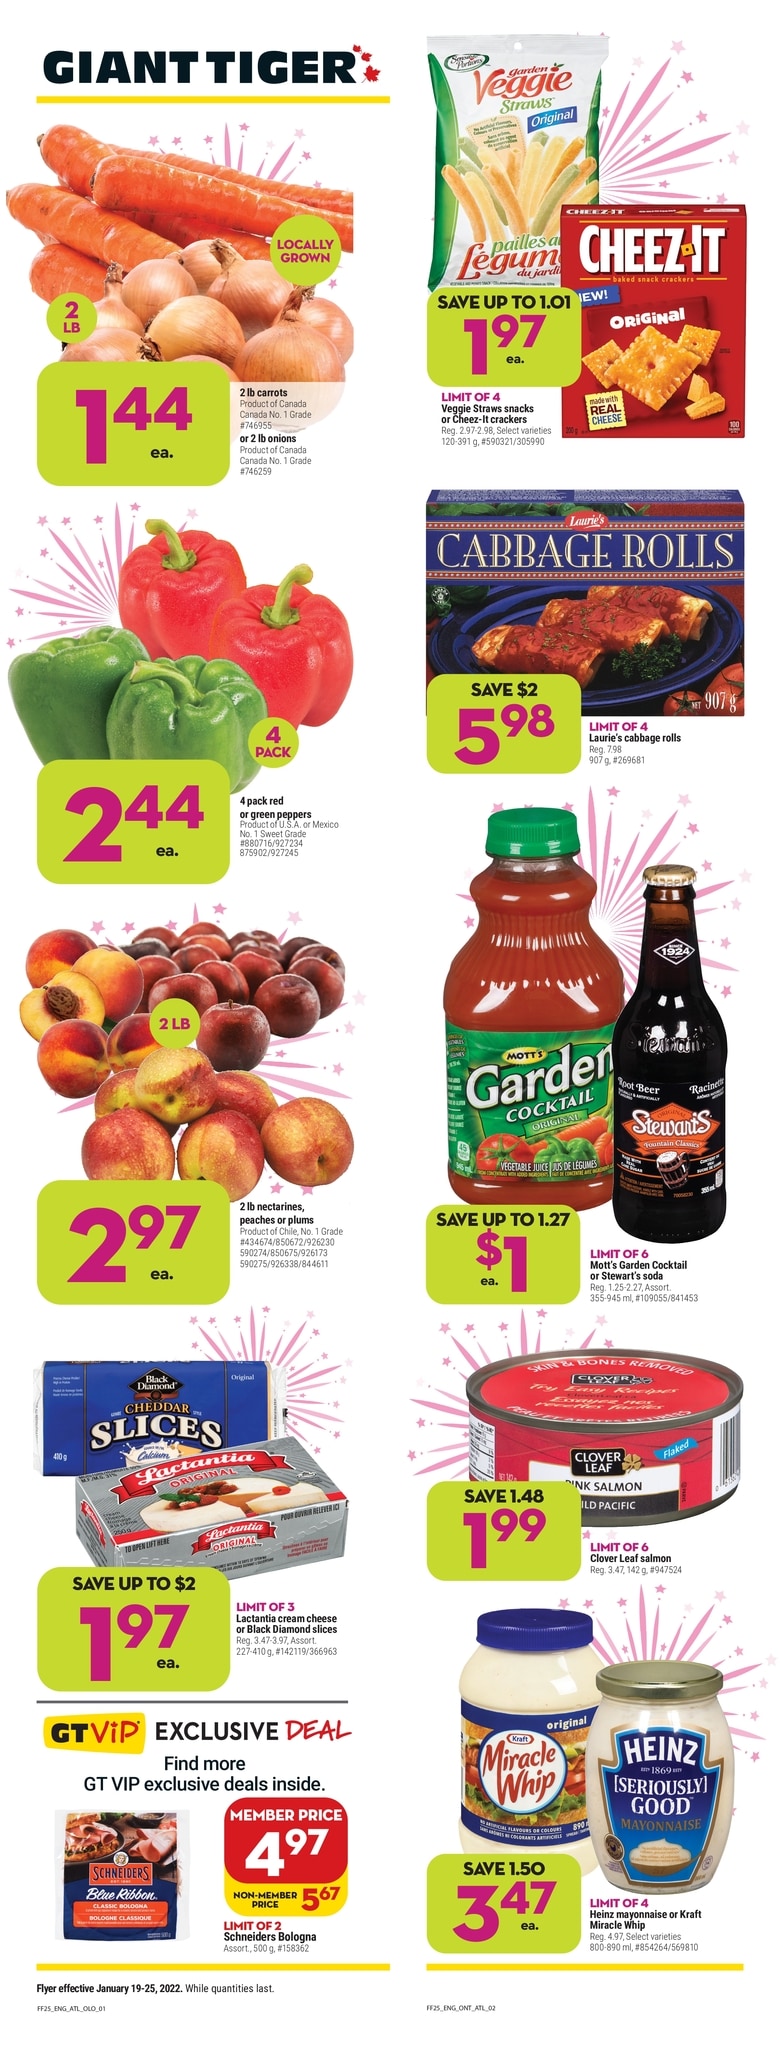 Giant Tiger - Weekly Flyer Specials - Page 1